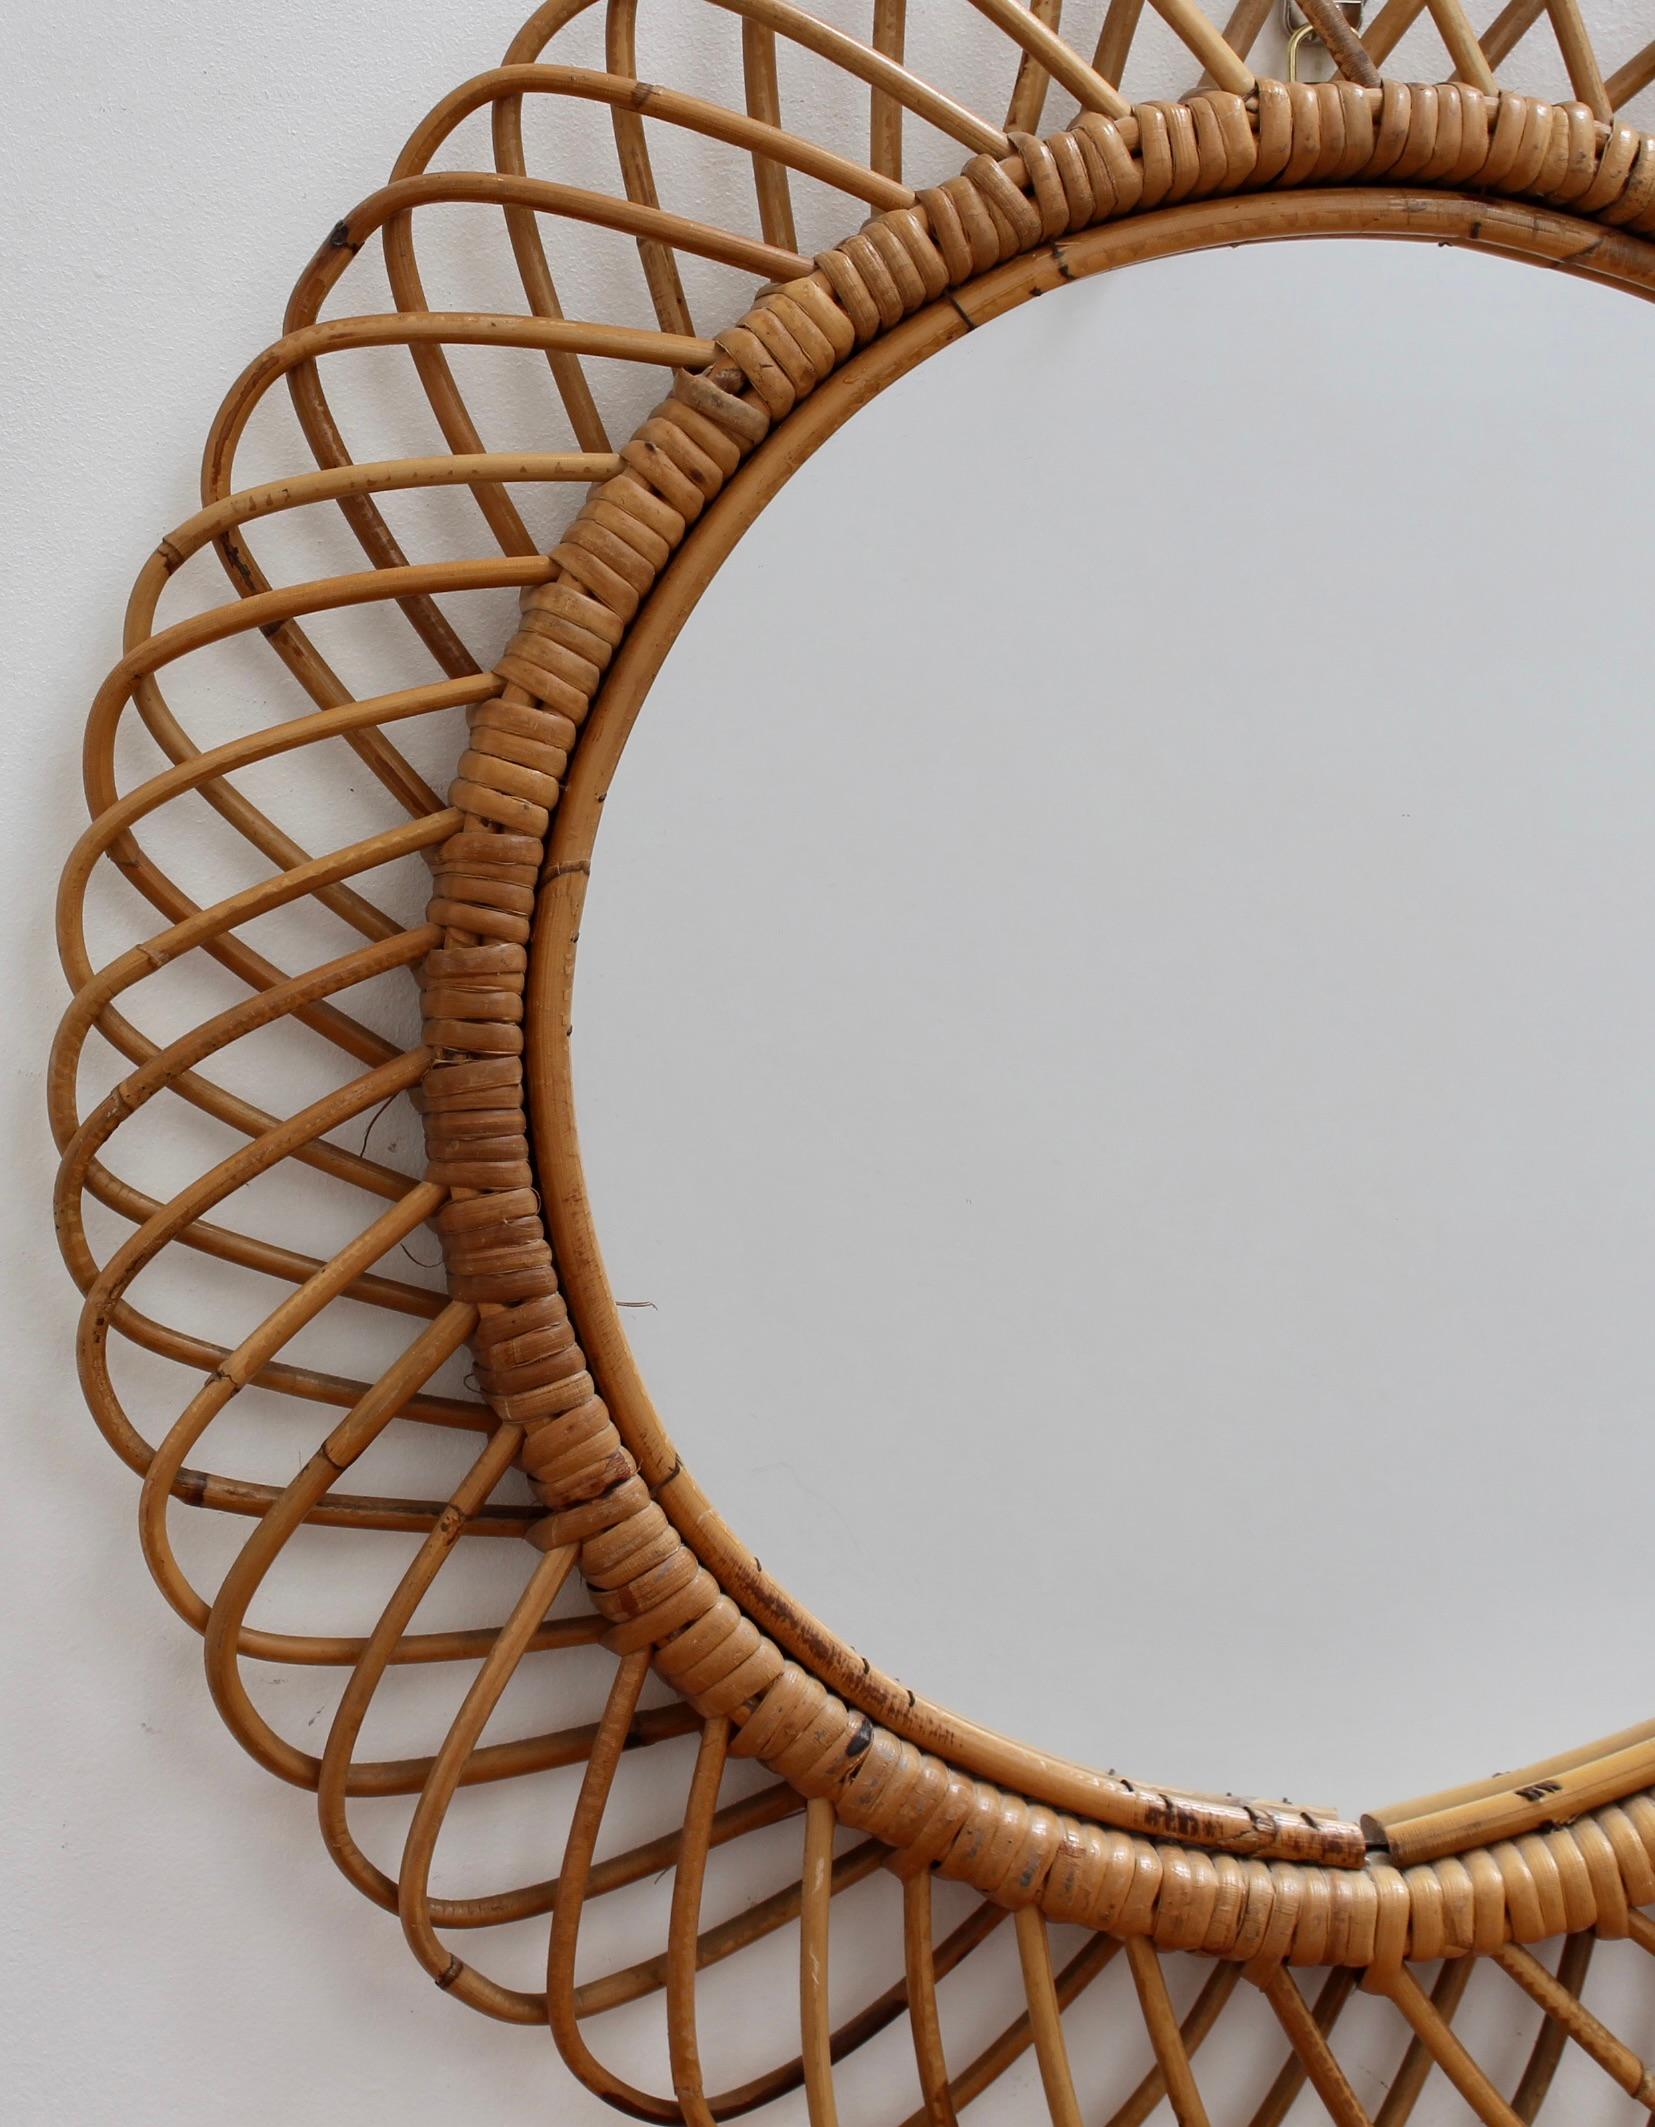 Italian rattan round wall mirror (circa 1960s) in the style of Franco Albini. This is a delightful vintage mirror with a complex weave of rattan. There is a characterful patina on the rattan and it is in good overall condition. The mirror glass is